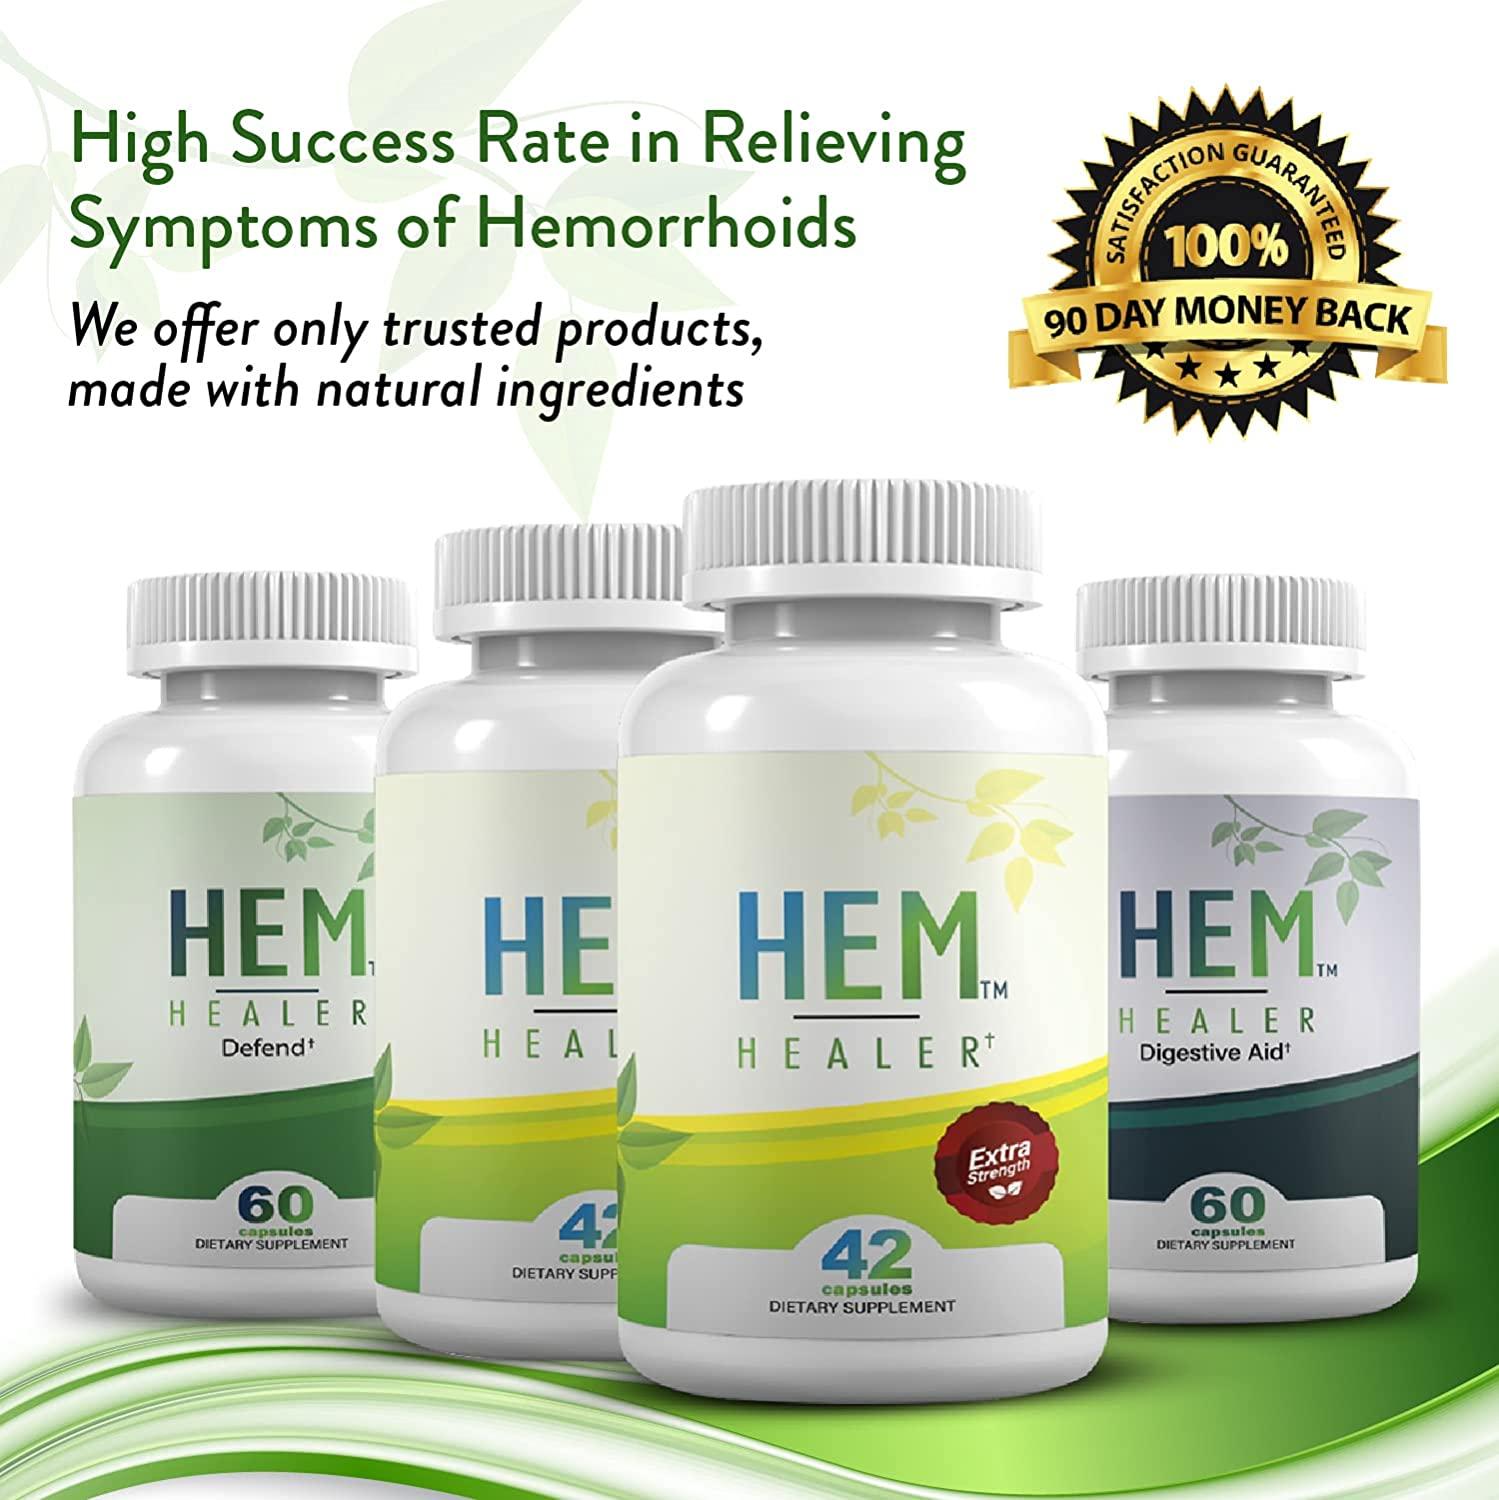 Hem Healer Hemorrhoid Treatment For Hemorrhoid Relief Reduce Swelling And Inflammation Soothe 5958